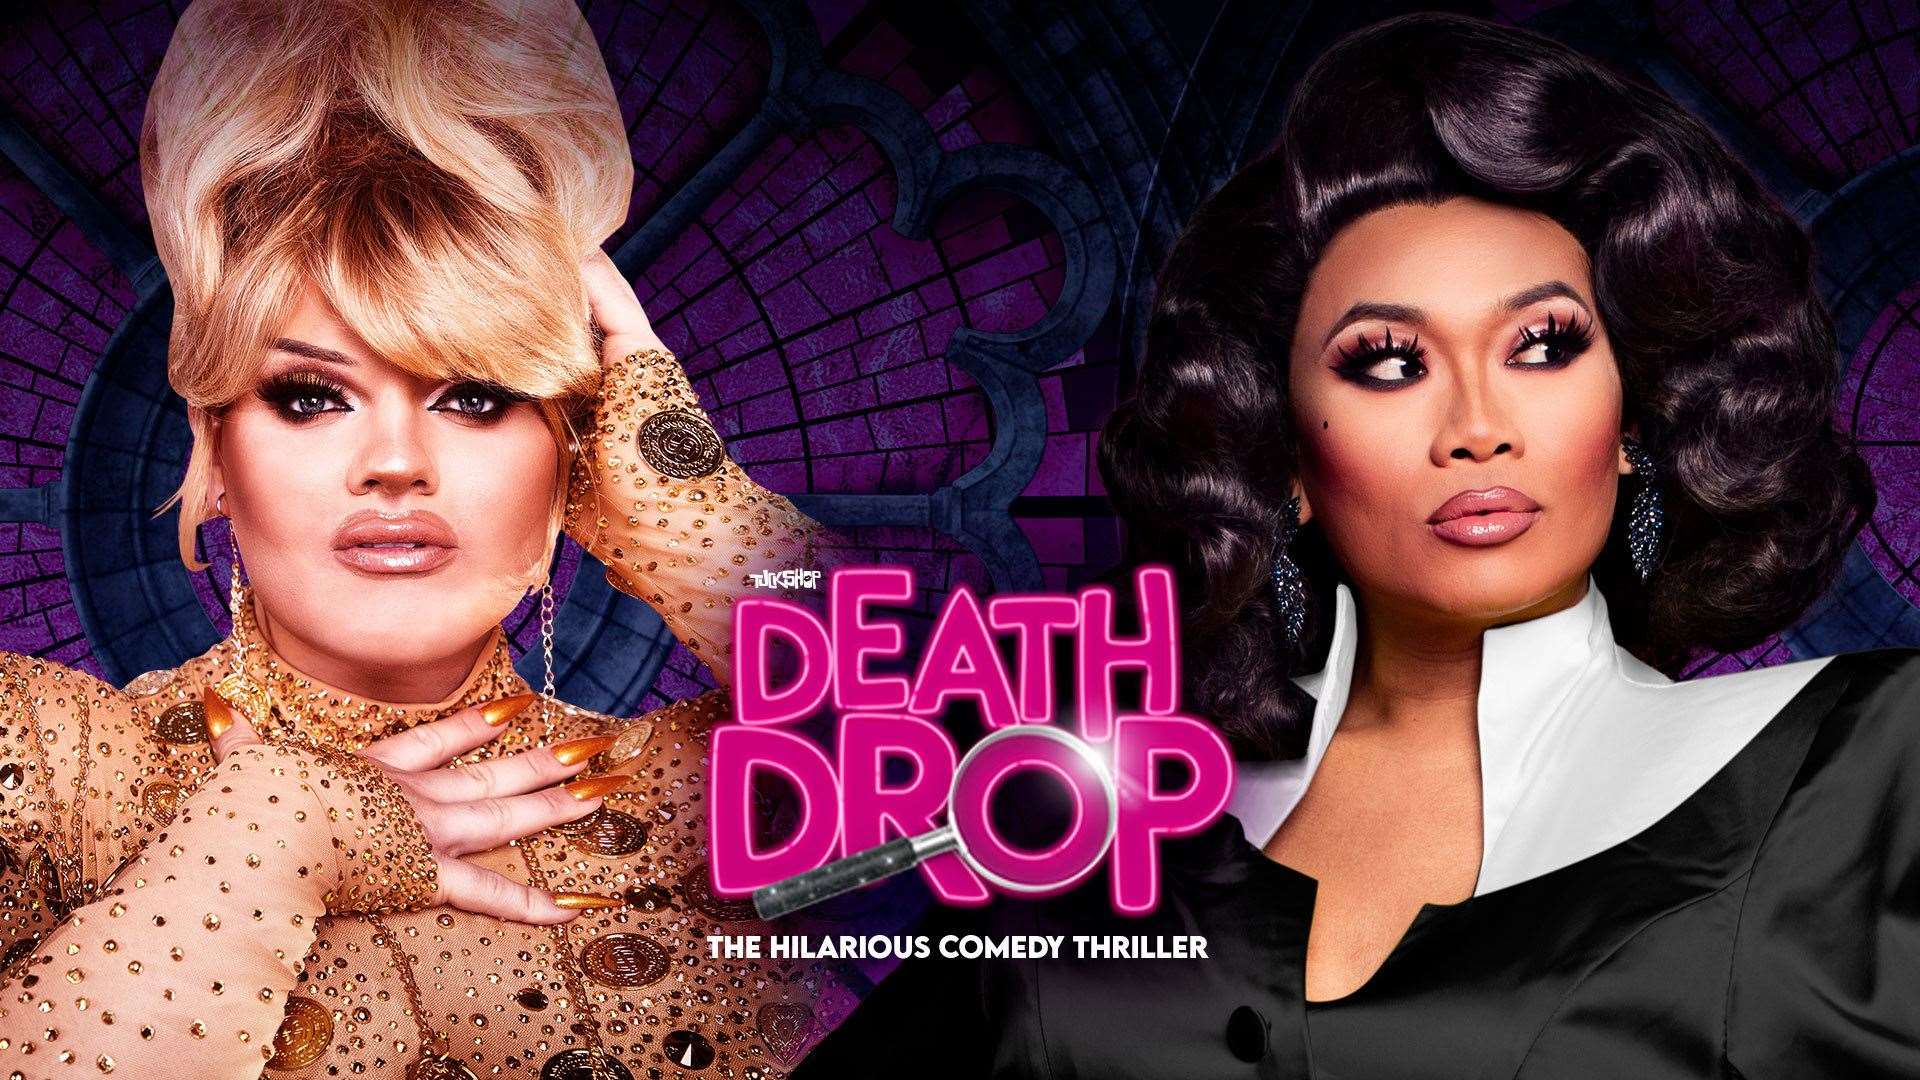 Kitty Scott-Claus will join the Death Drop cast in Aberdeen. Jujubee will join the cast later and will not be in Aberdeen.